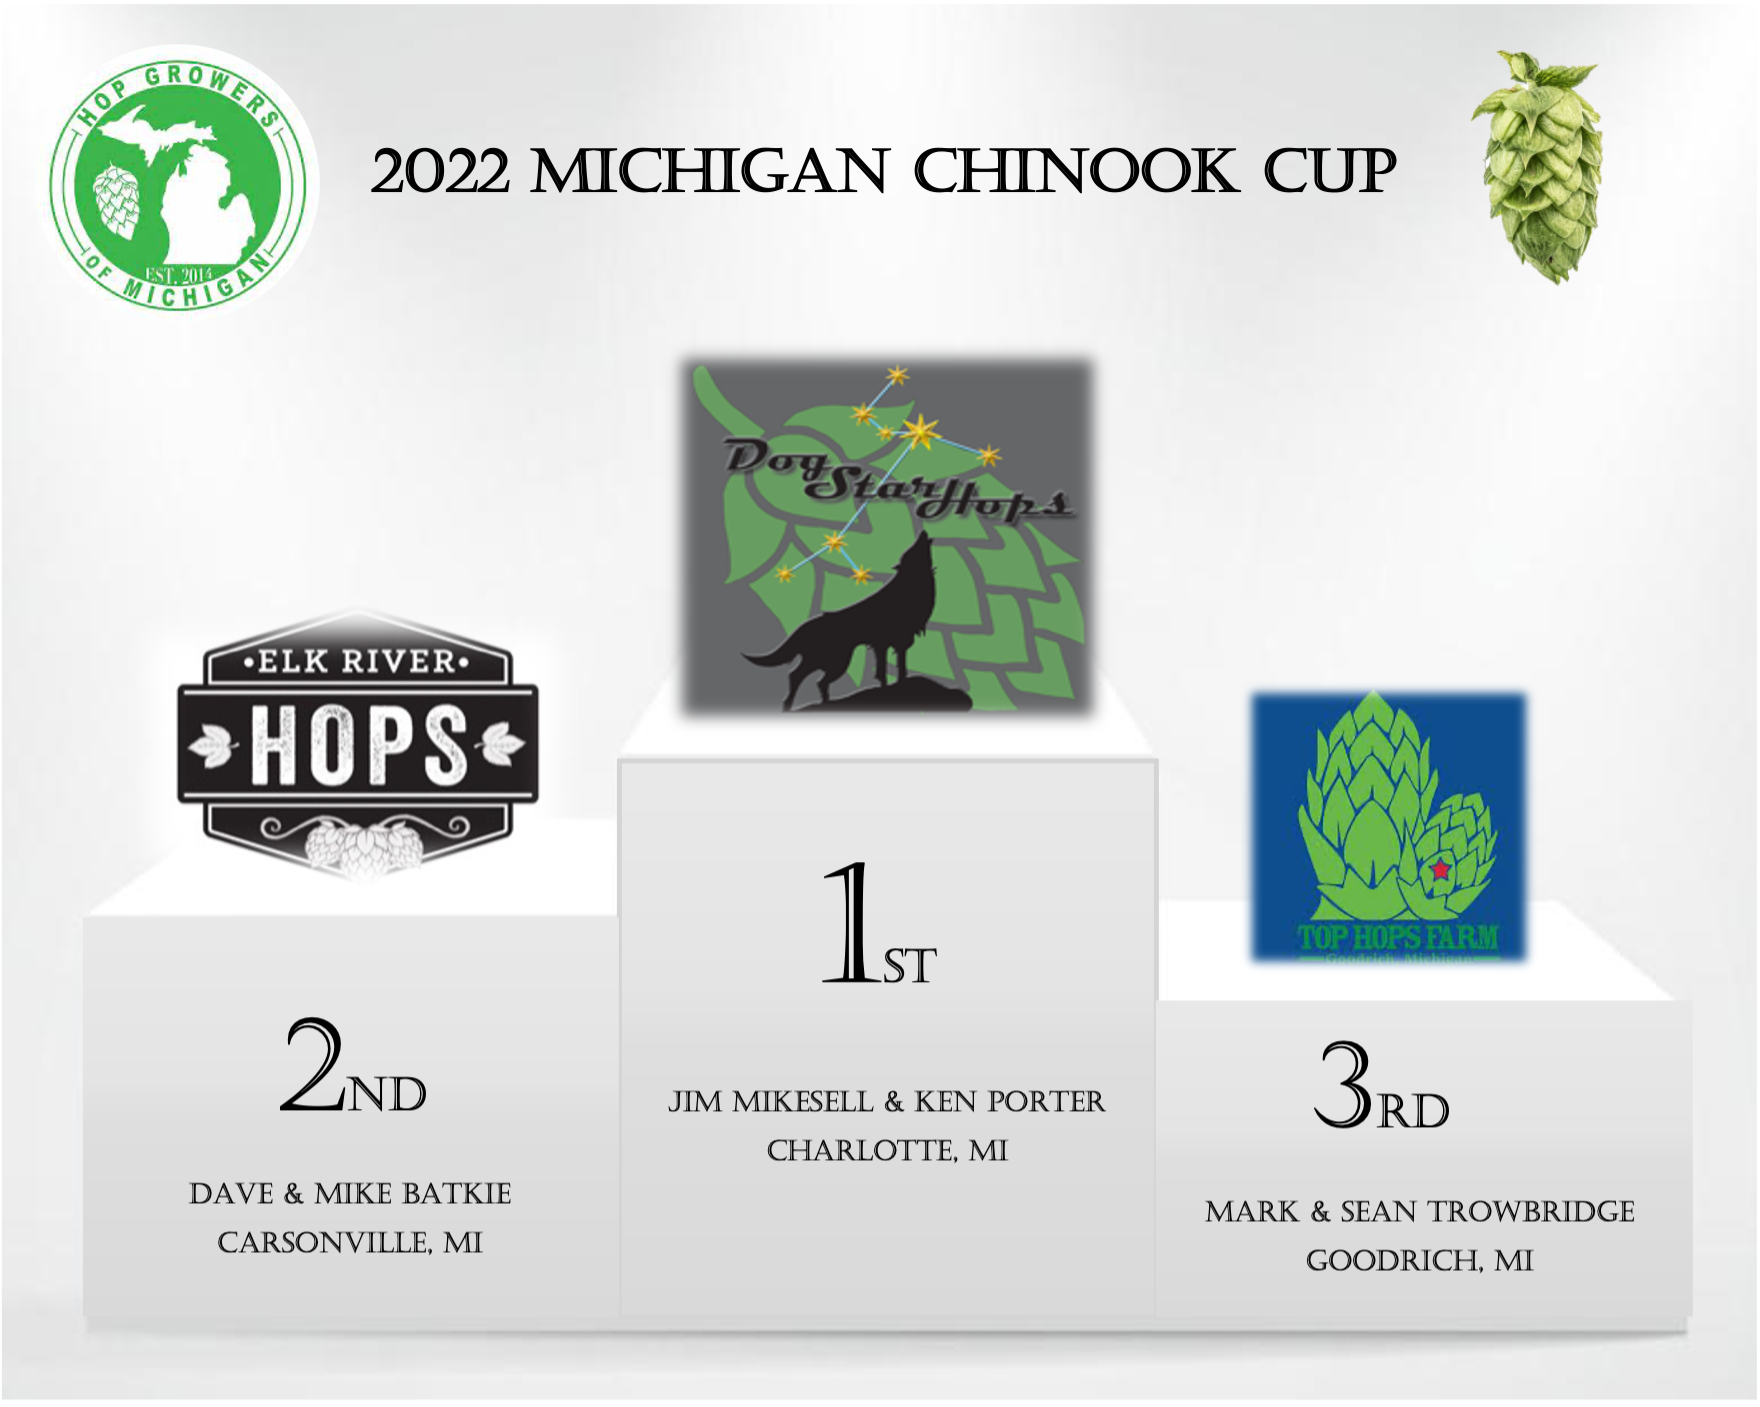 Winners of the Chinook Cup